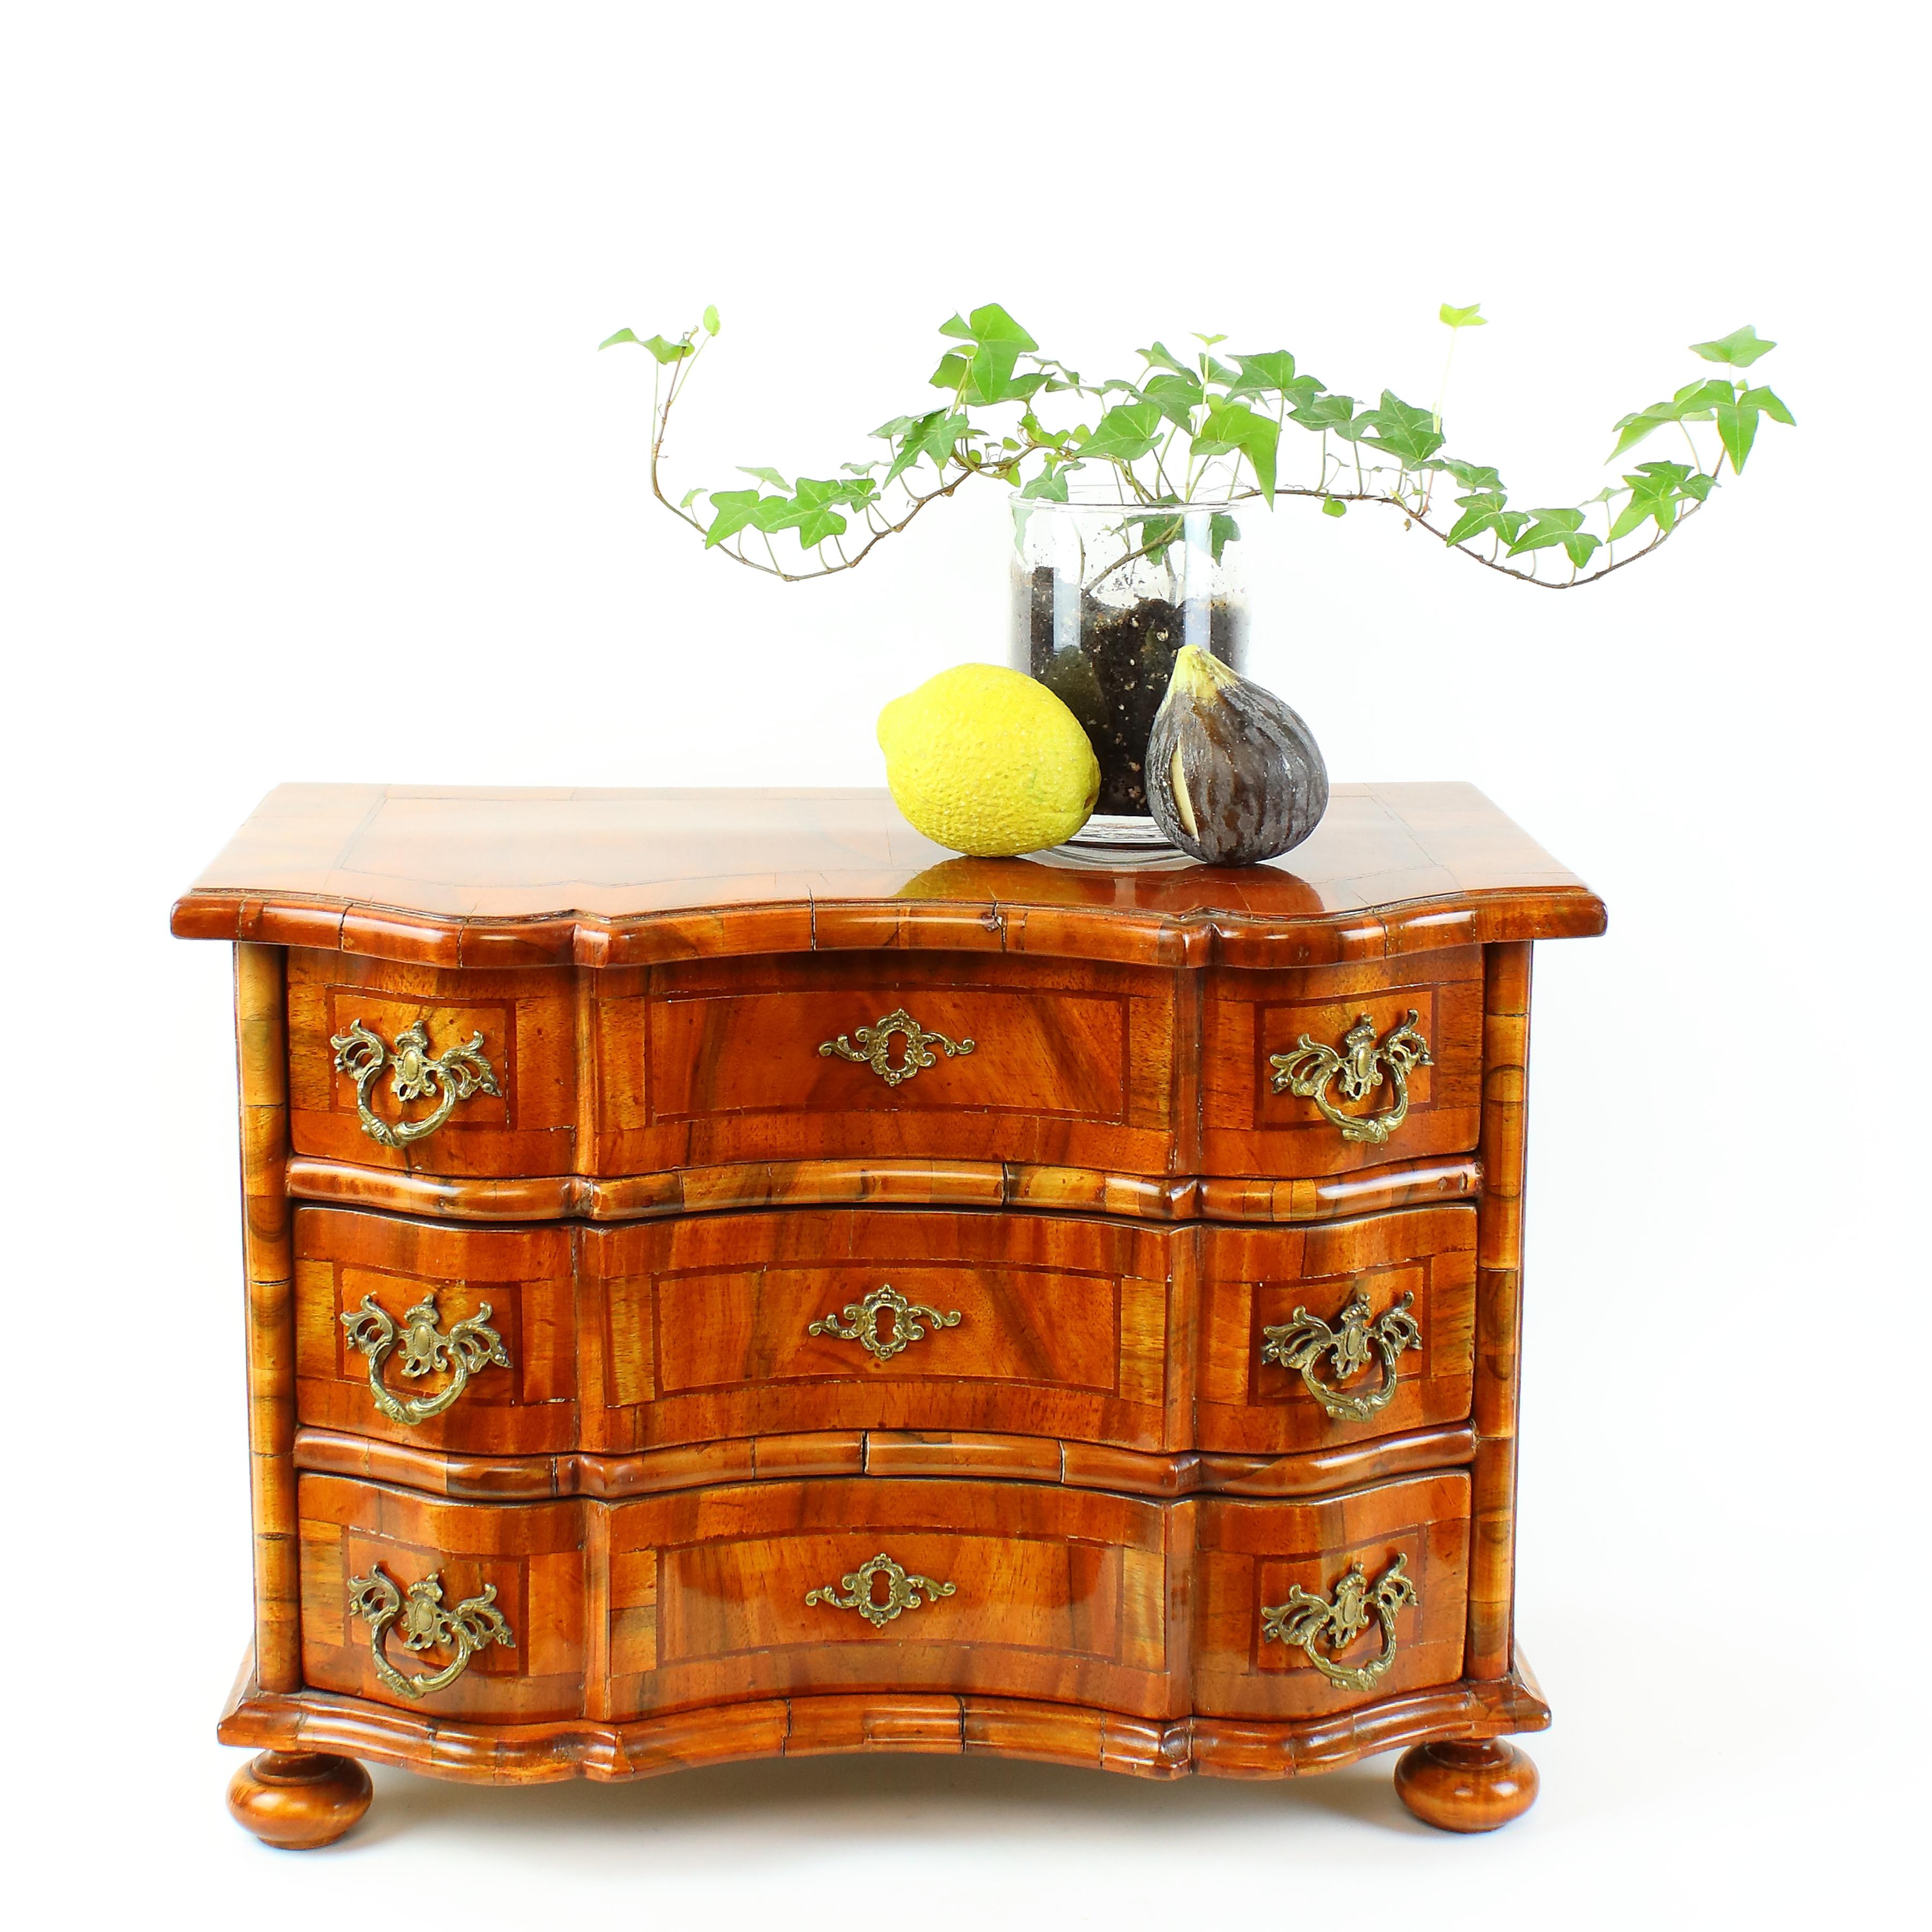 Rectangular German Baroque style chest of drawers with curvy front standing on four bun feet and holding three frieze drawers with bronze handles. Top, front and both sides with fine walnut marquetry. 
The chest of drawers bears all features of a